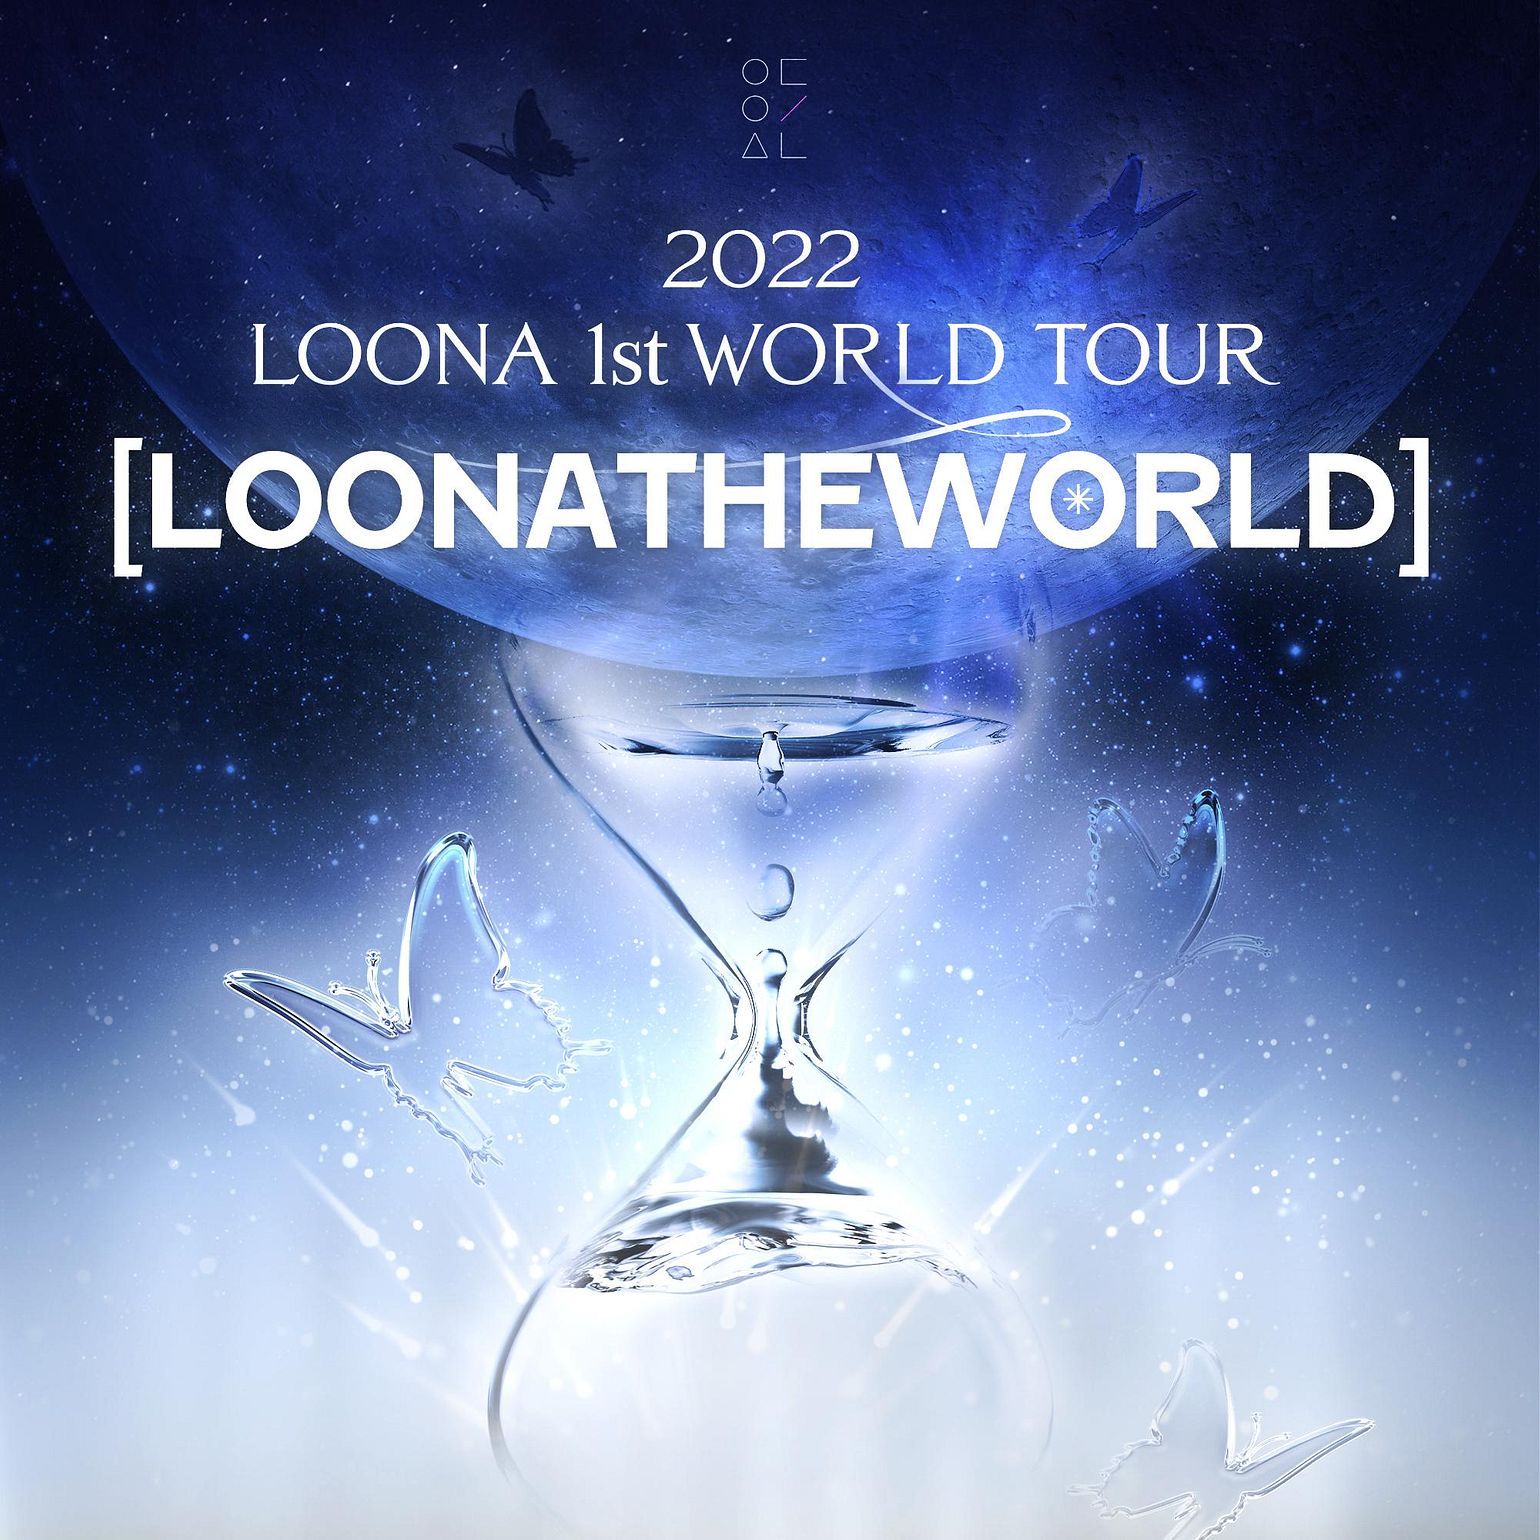 Sean Healy presents Loona 2022 1st World Tour Tickets at The Midway